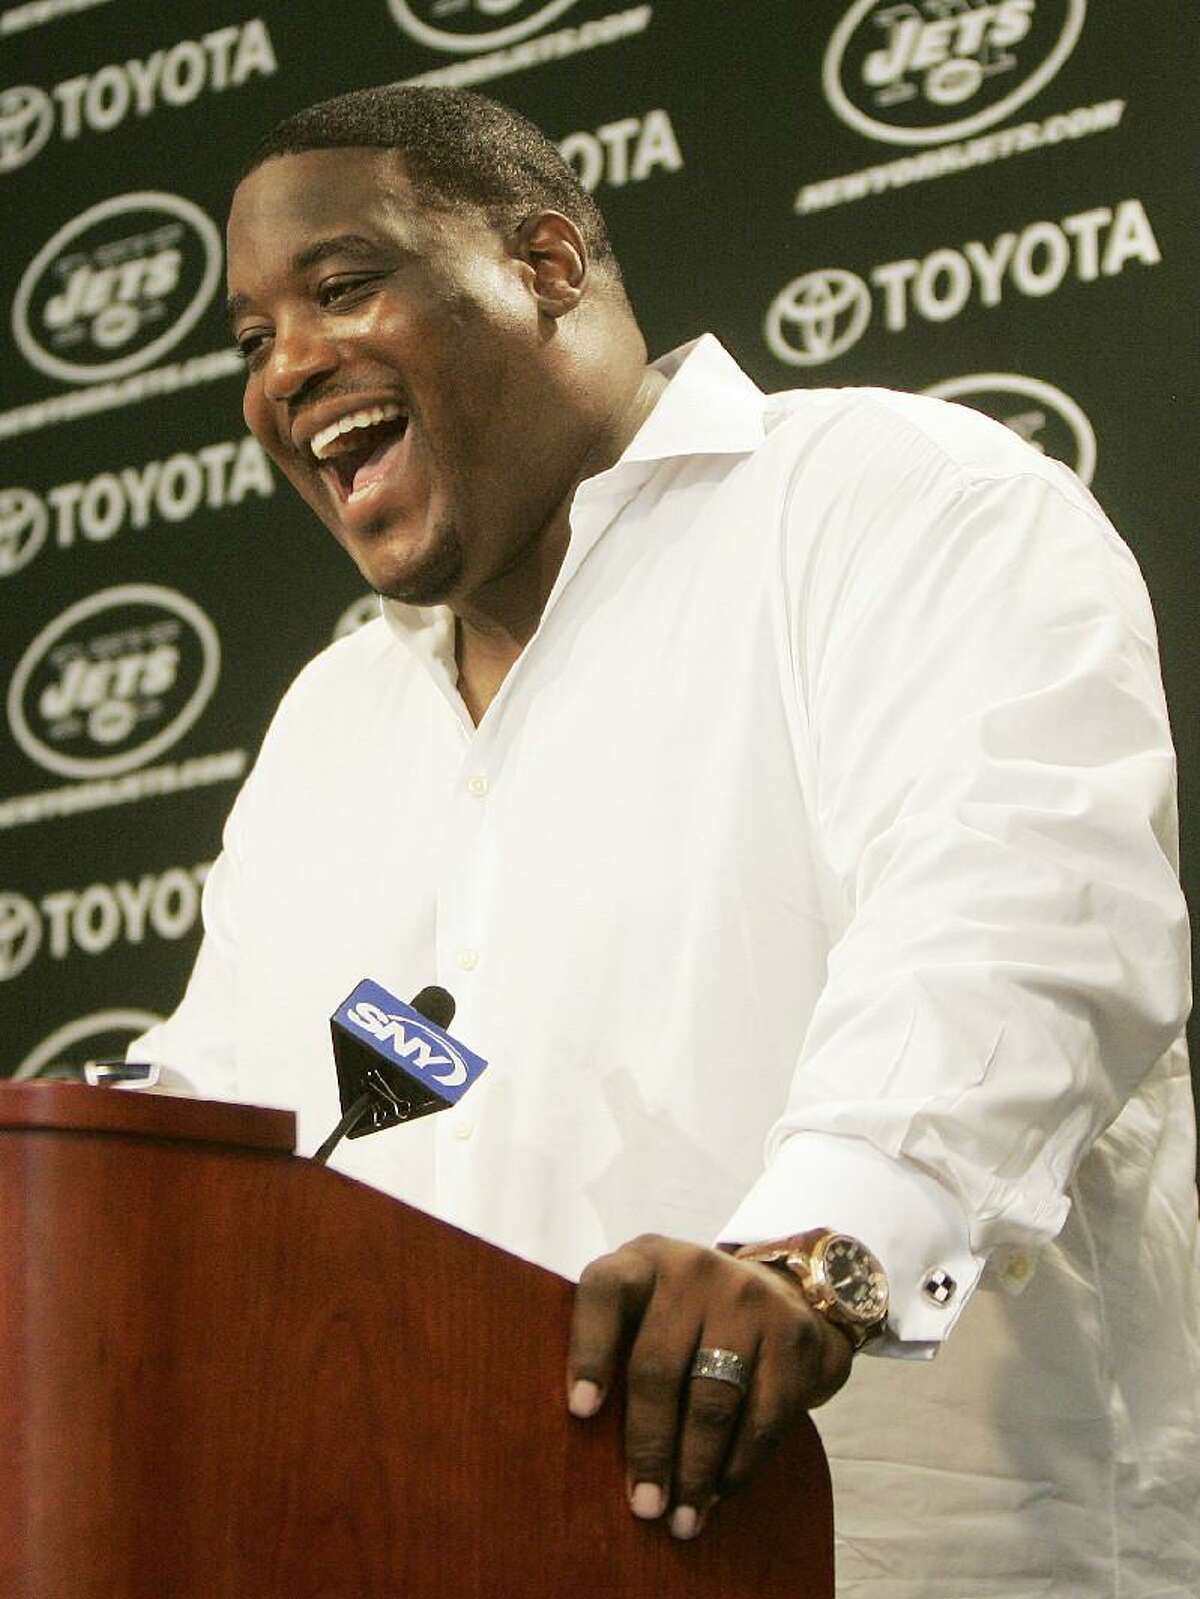 Former Jets offensive lineman Damien Woody retires from NFL after